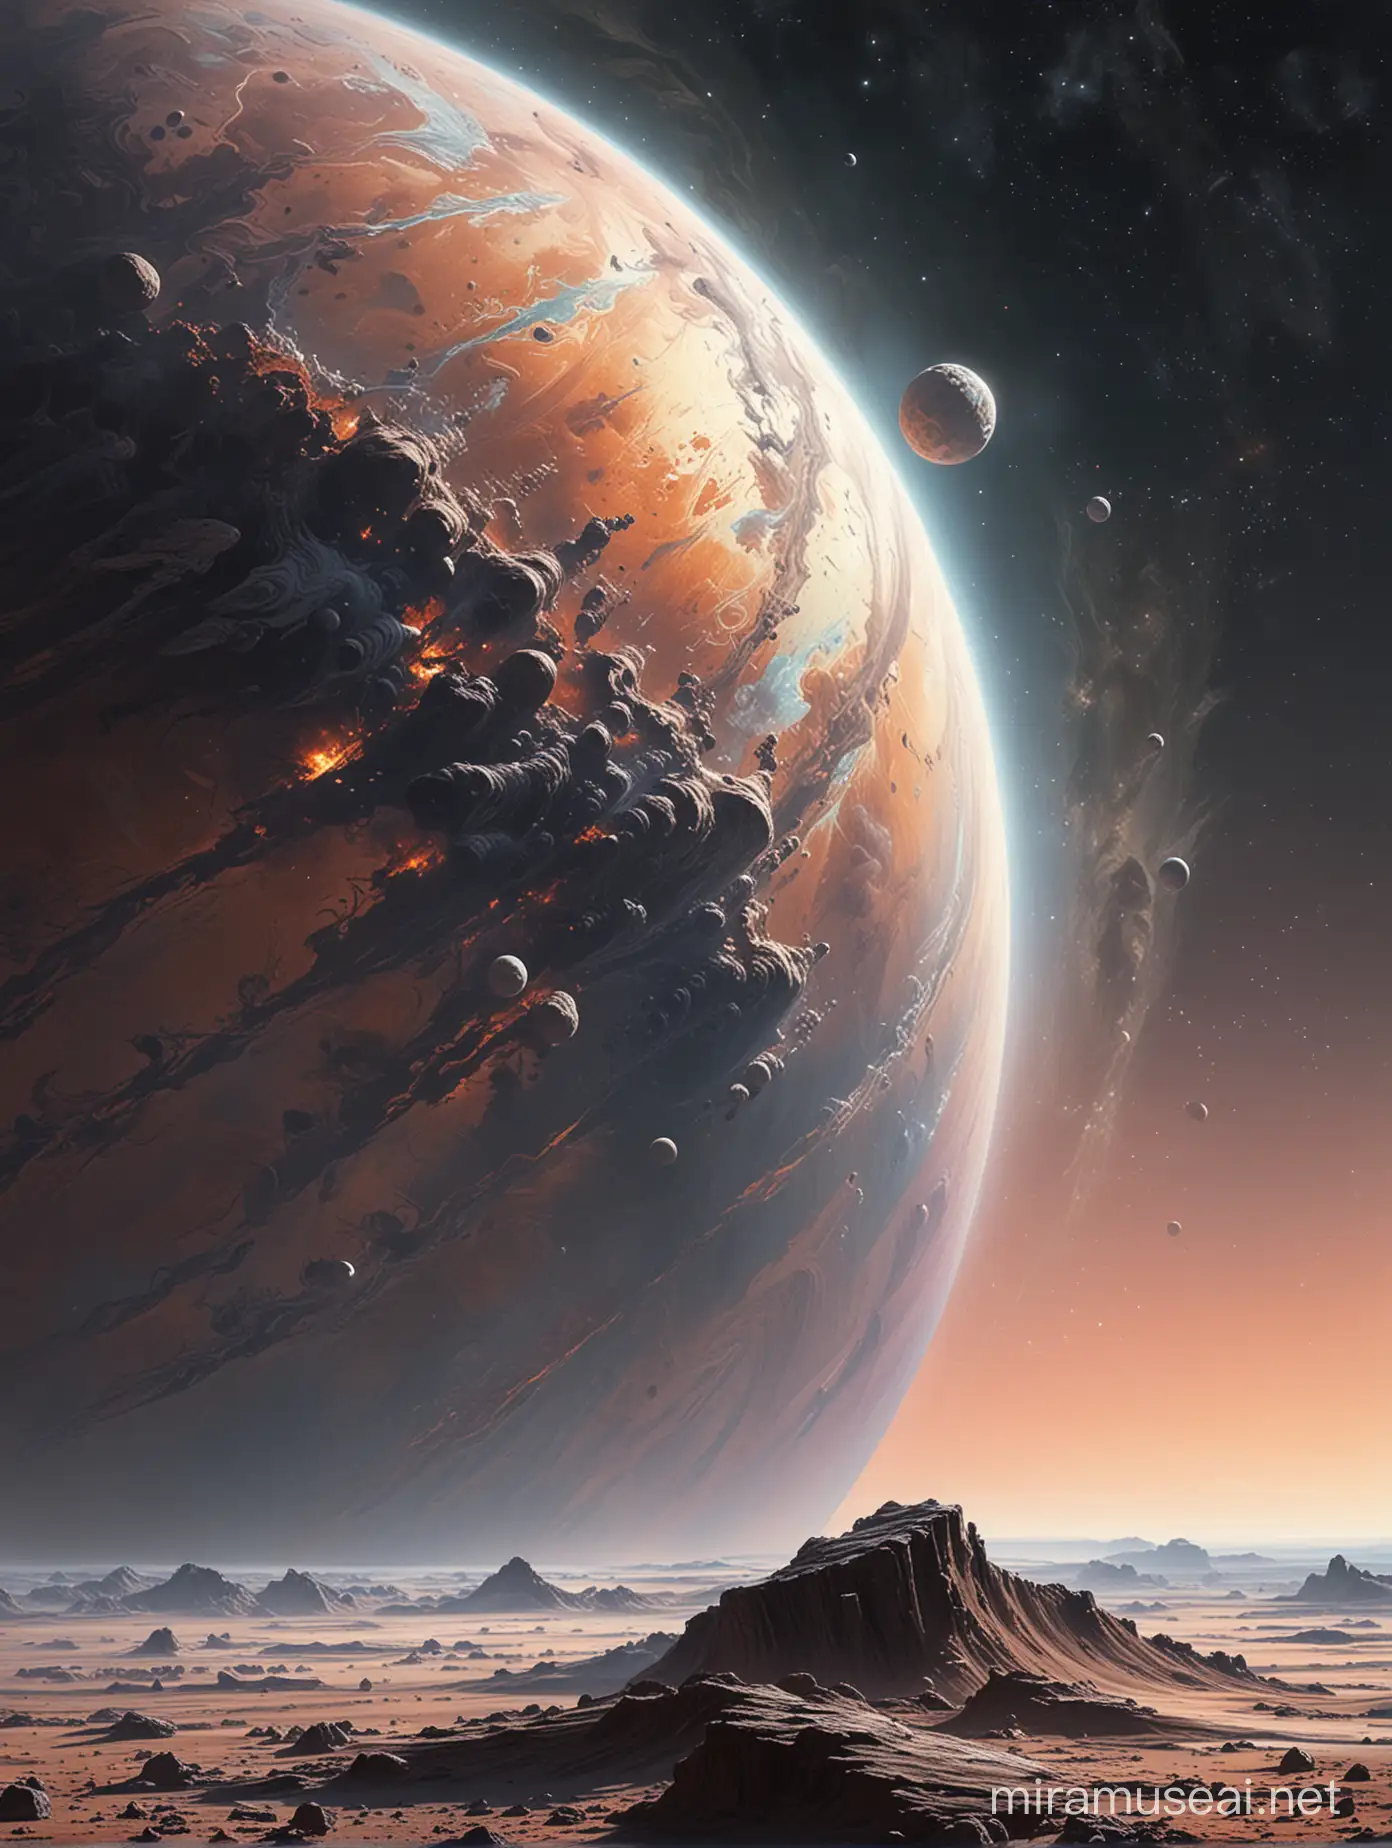 Highly detailed painting, wide view from the side, an asteroid skimming the surface of a gas giant planet, use muted pastel colors only, high quality